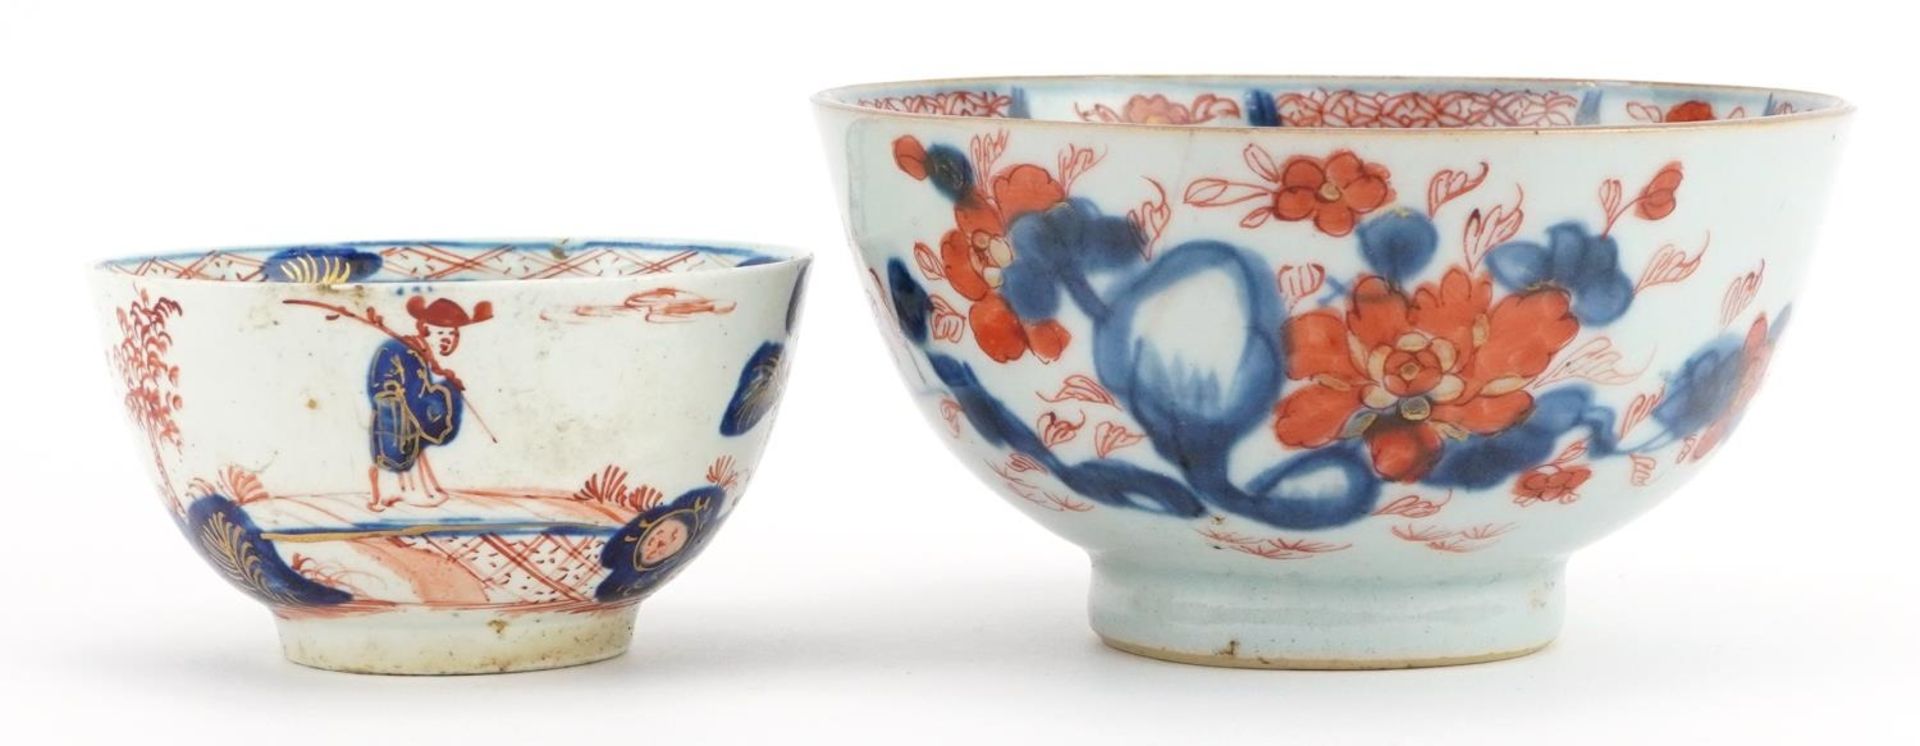 Two Imari ceramic bowls including Japanese example, the largest 11.5cm in diameter : For further